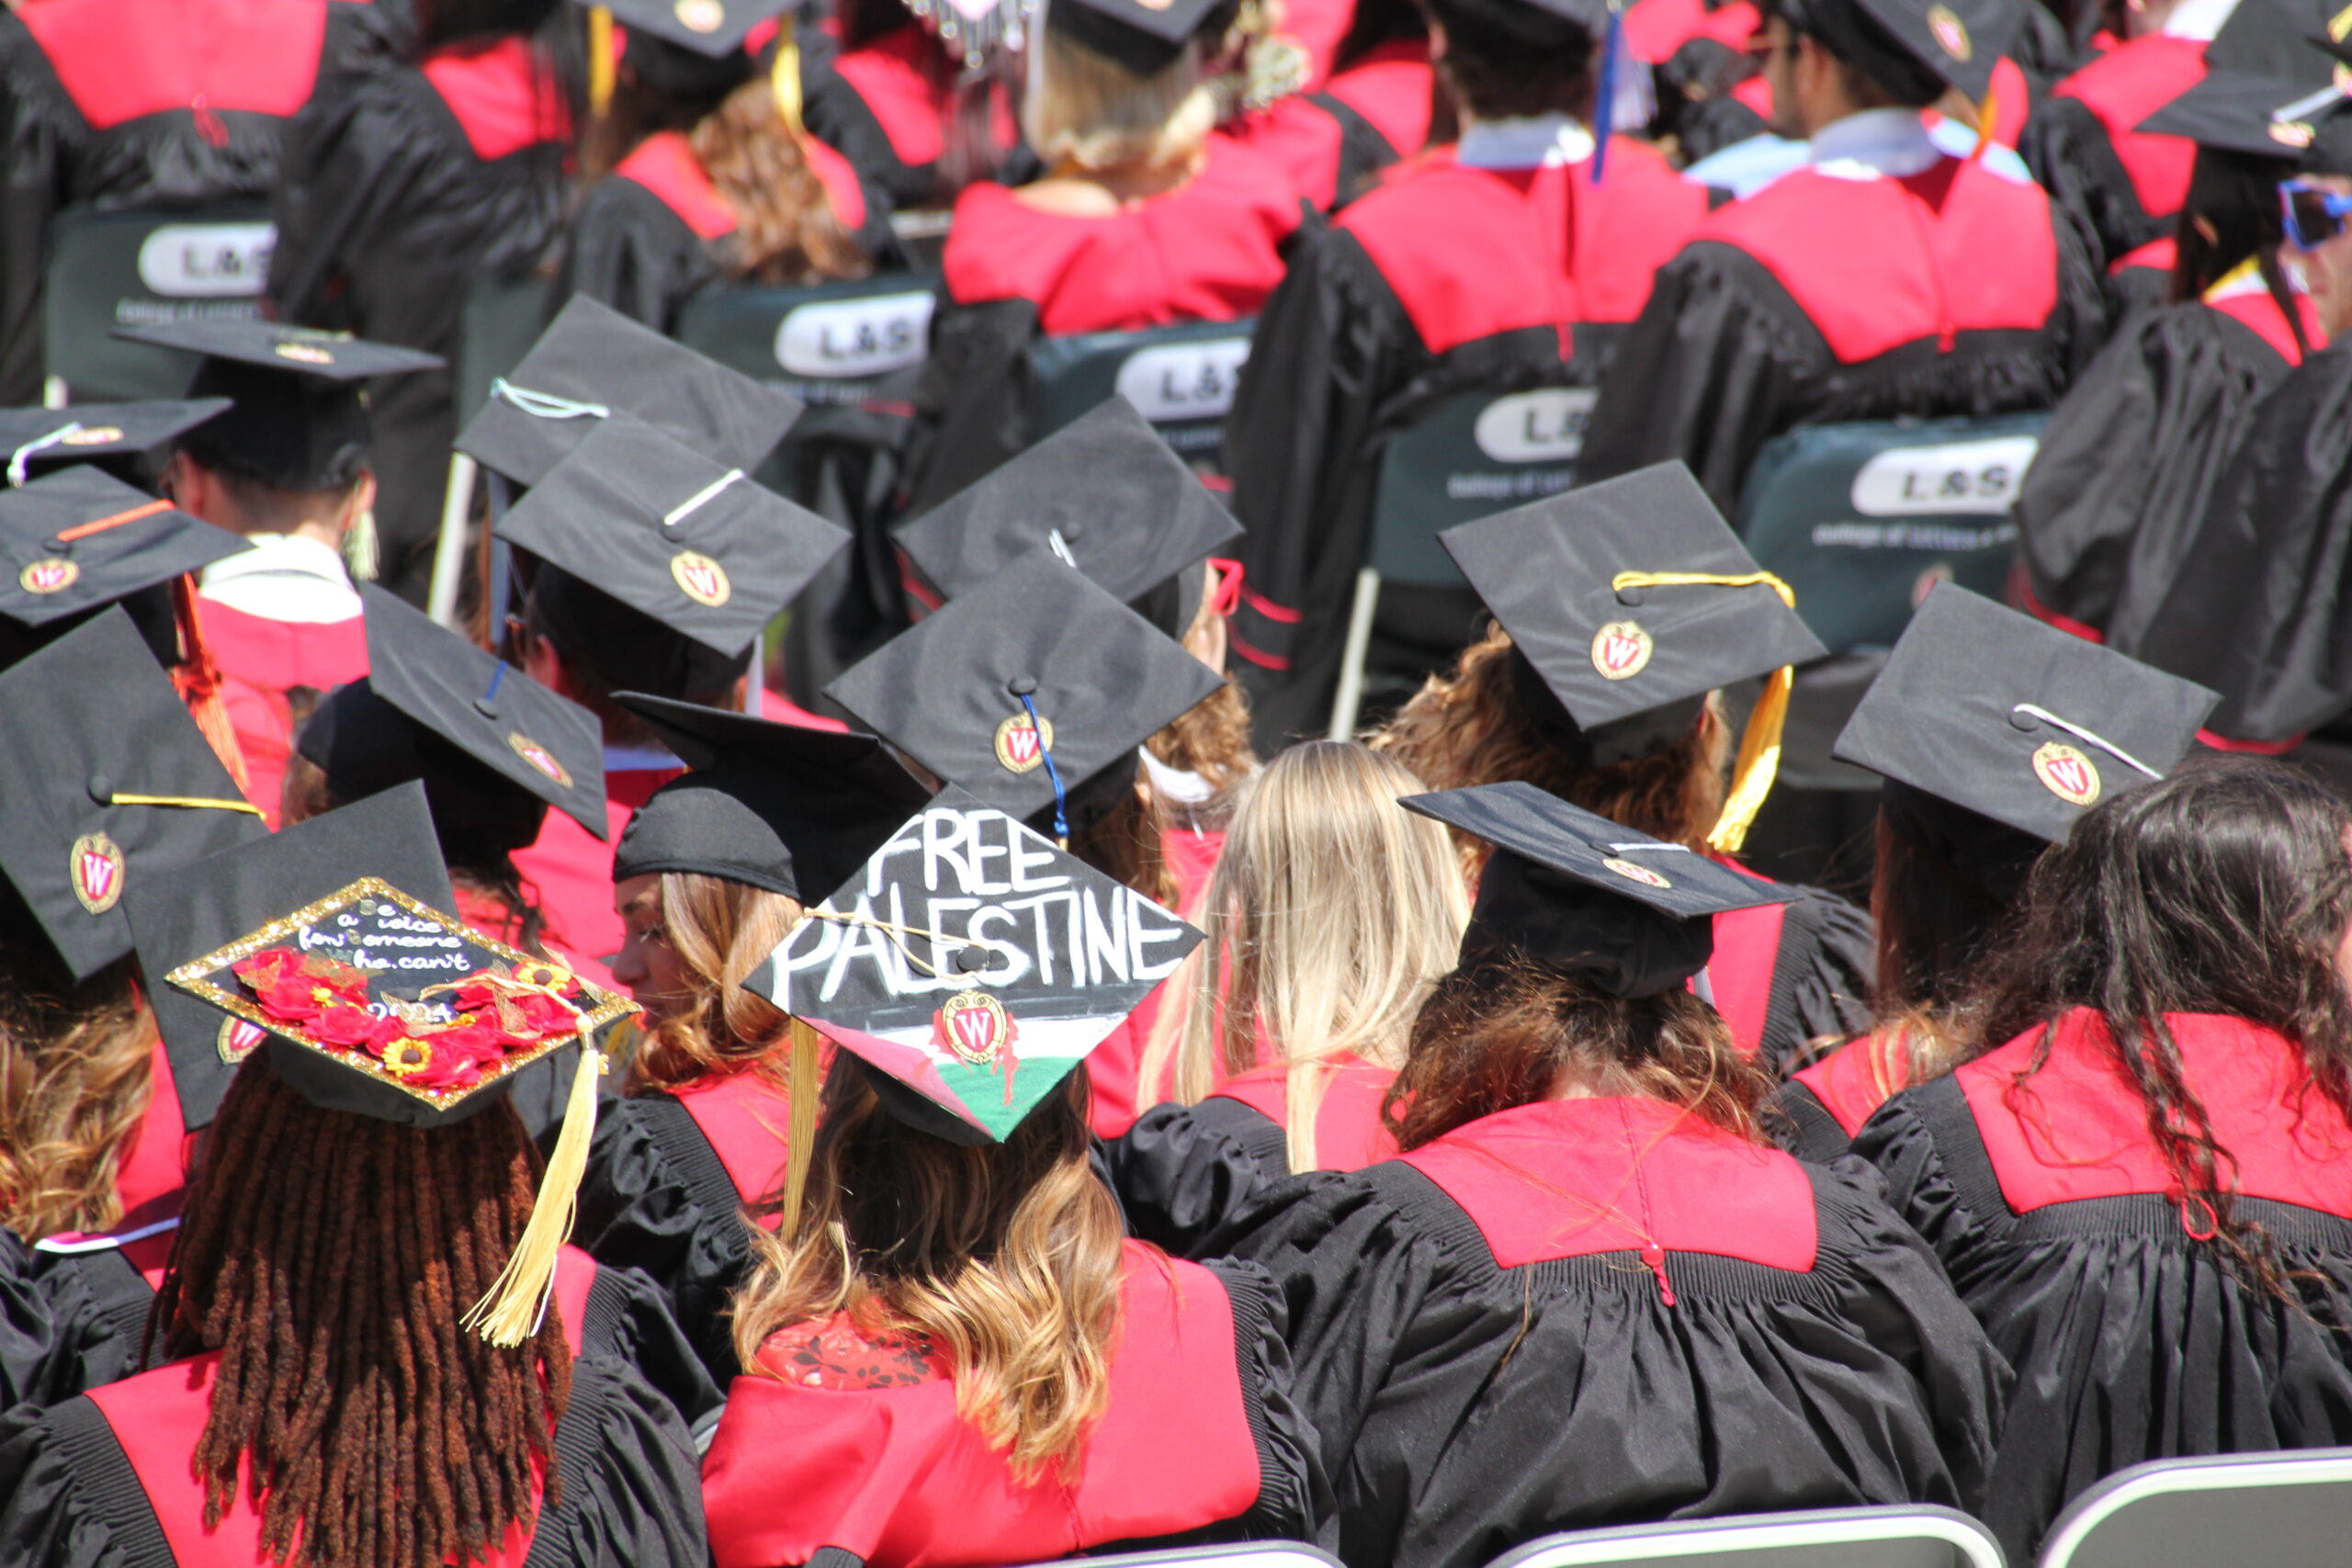 A University of Wisconsin-Madison student wears a graduation cap with the message "FREE PALESTINE" painted on top.